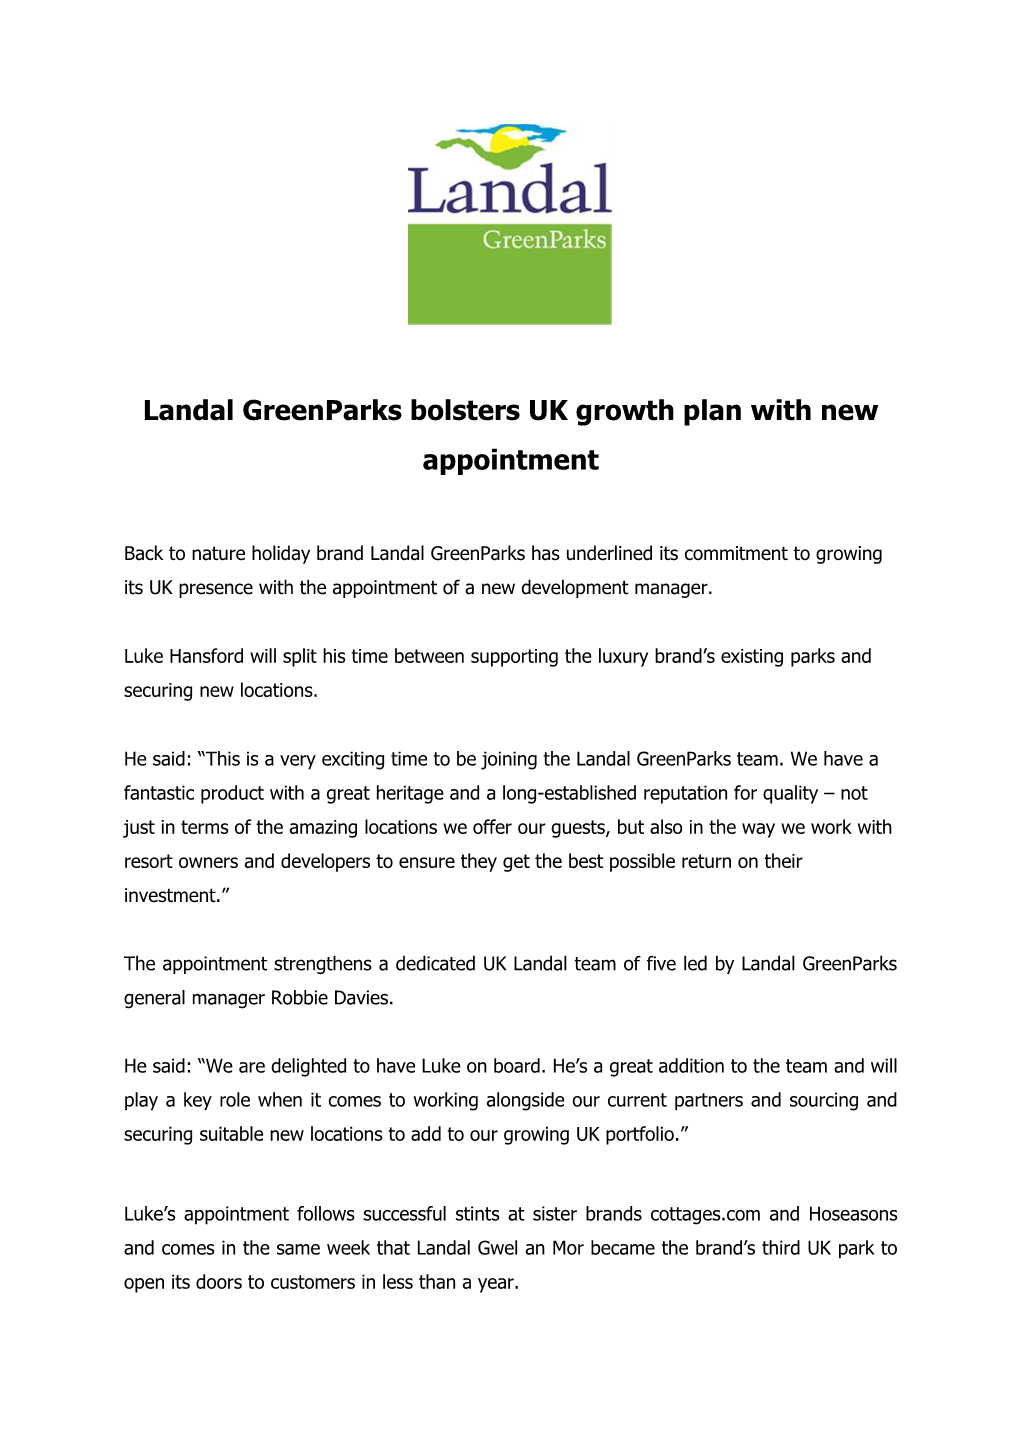 Landal Greenparks Bolsters UK Growth Plan with New Appointment